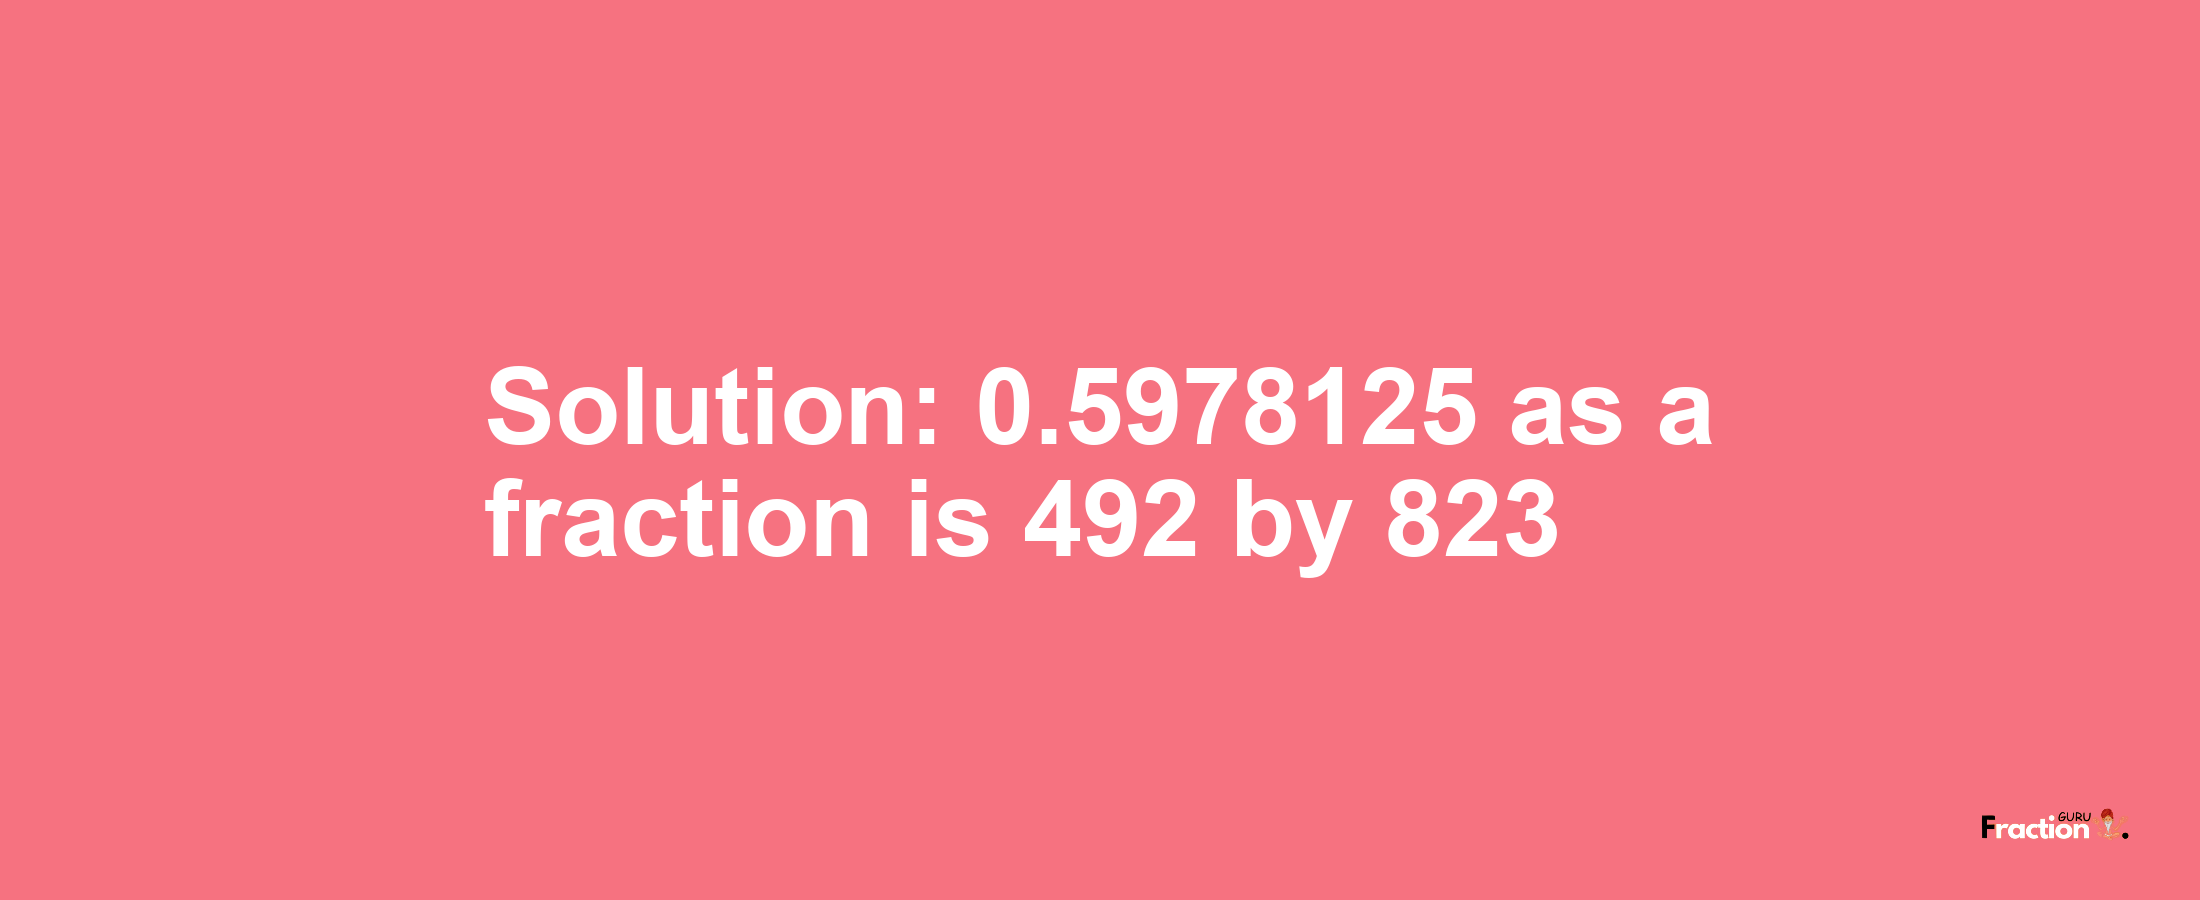 Solution:0.5978125 as a fraction is 492/823